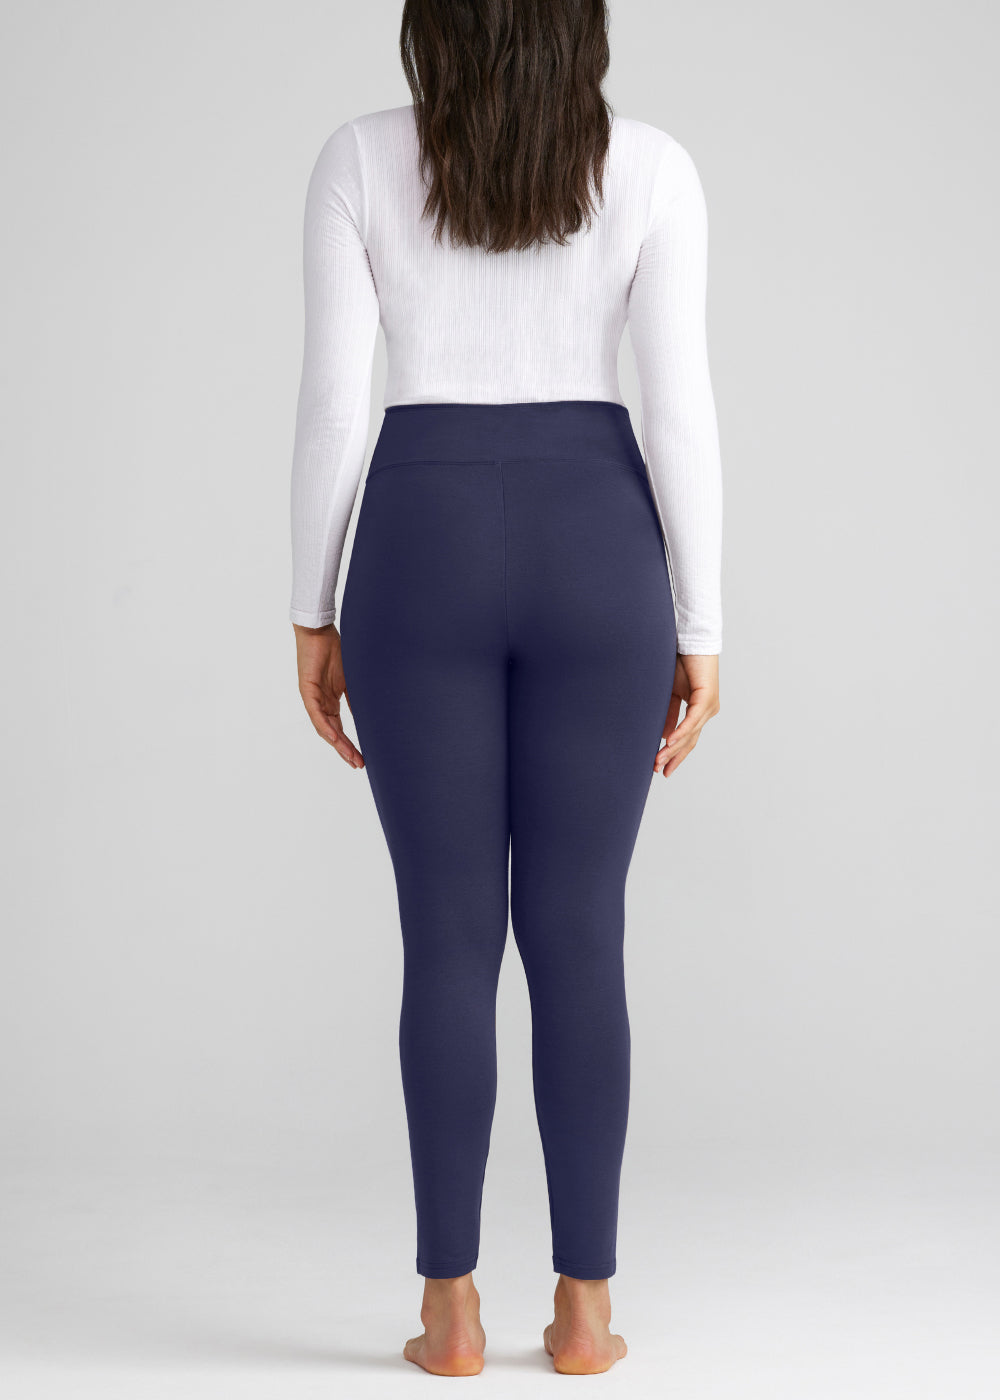 Discover more than 257 high waisted shaping leggings super hot